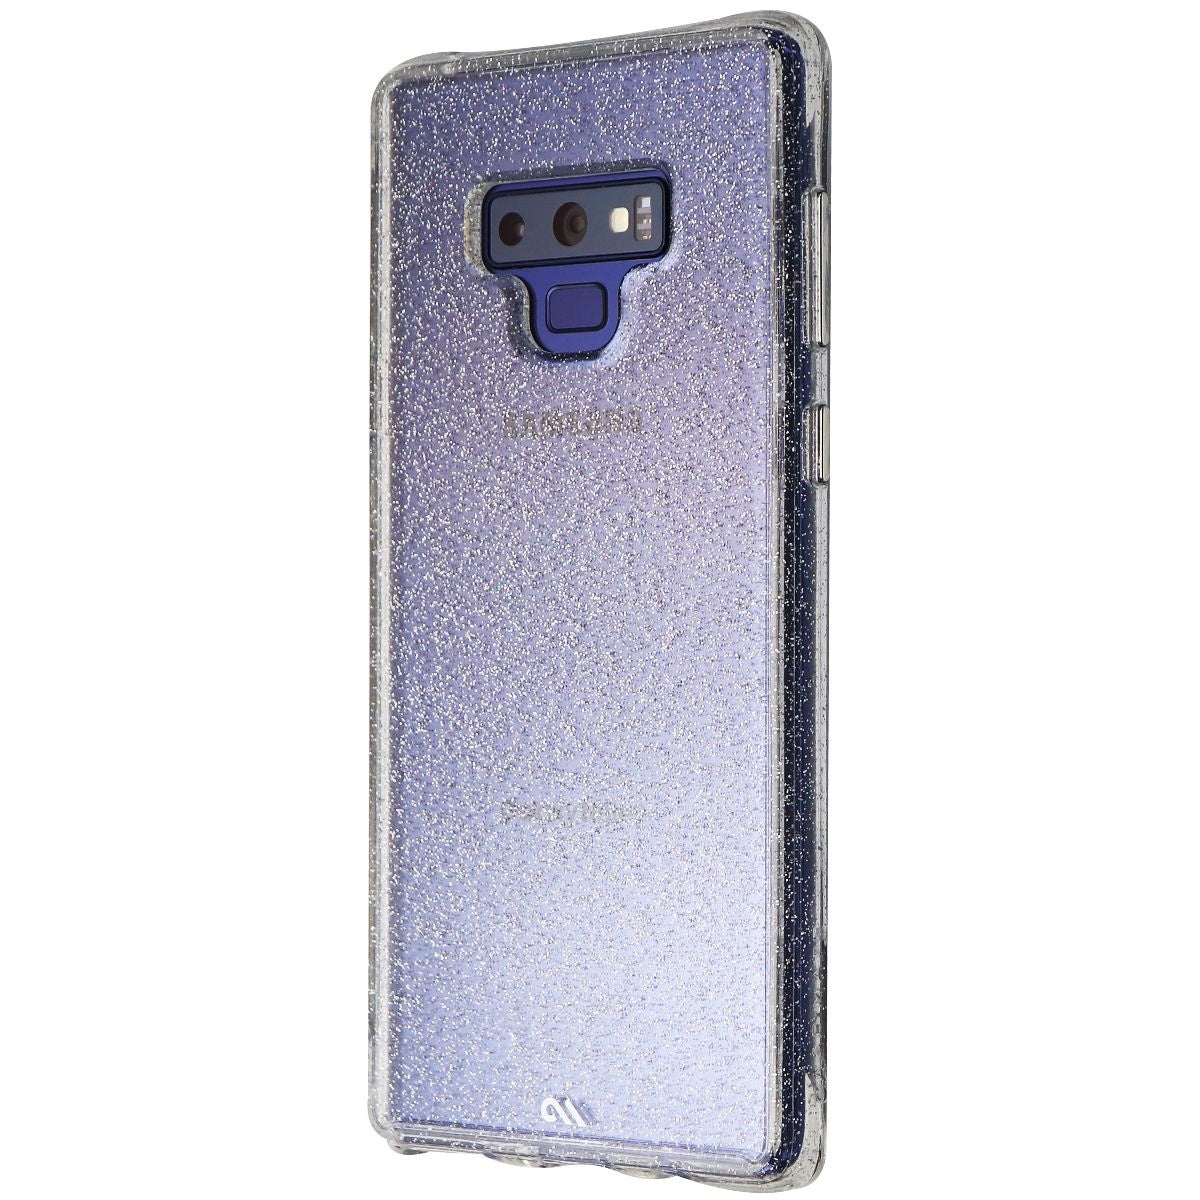 Case-Mate Sheer Crystal Case for Samsung Galaxy Note9 - Clear/Silver Glitter Cell Phone - Cases, Covers & Skins Case-Mate    - Simple Cell Bulk Wholesale Pricing - USA Seller